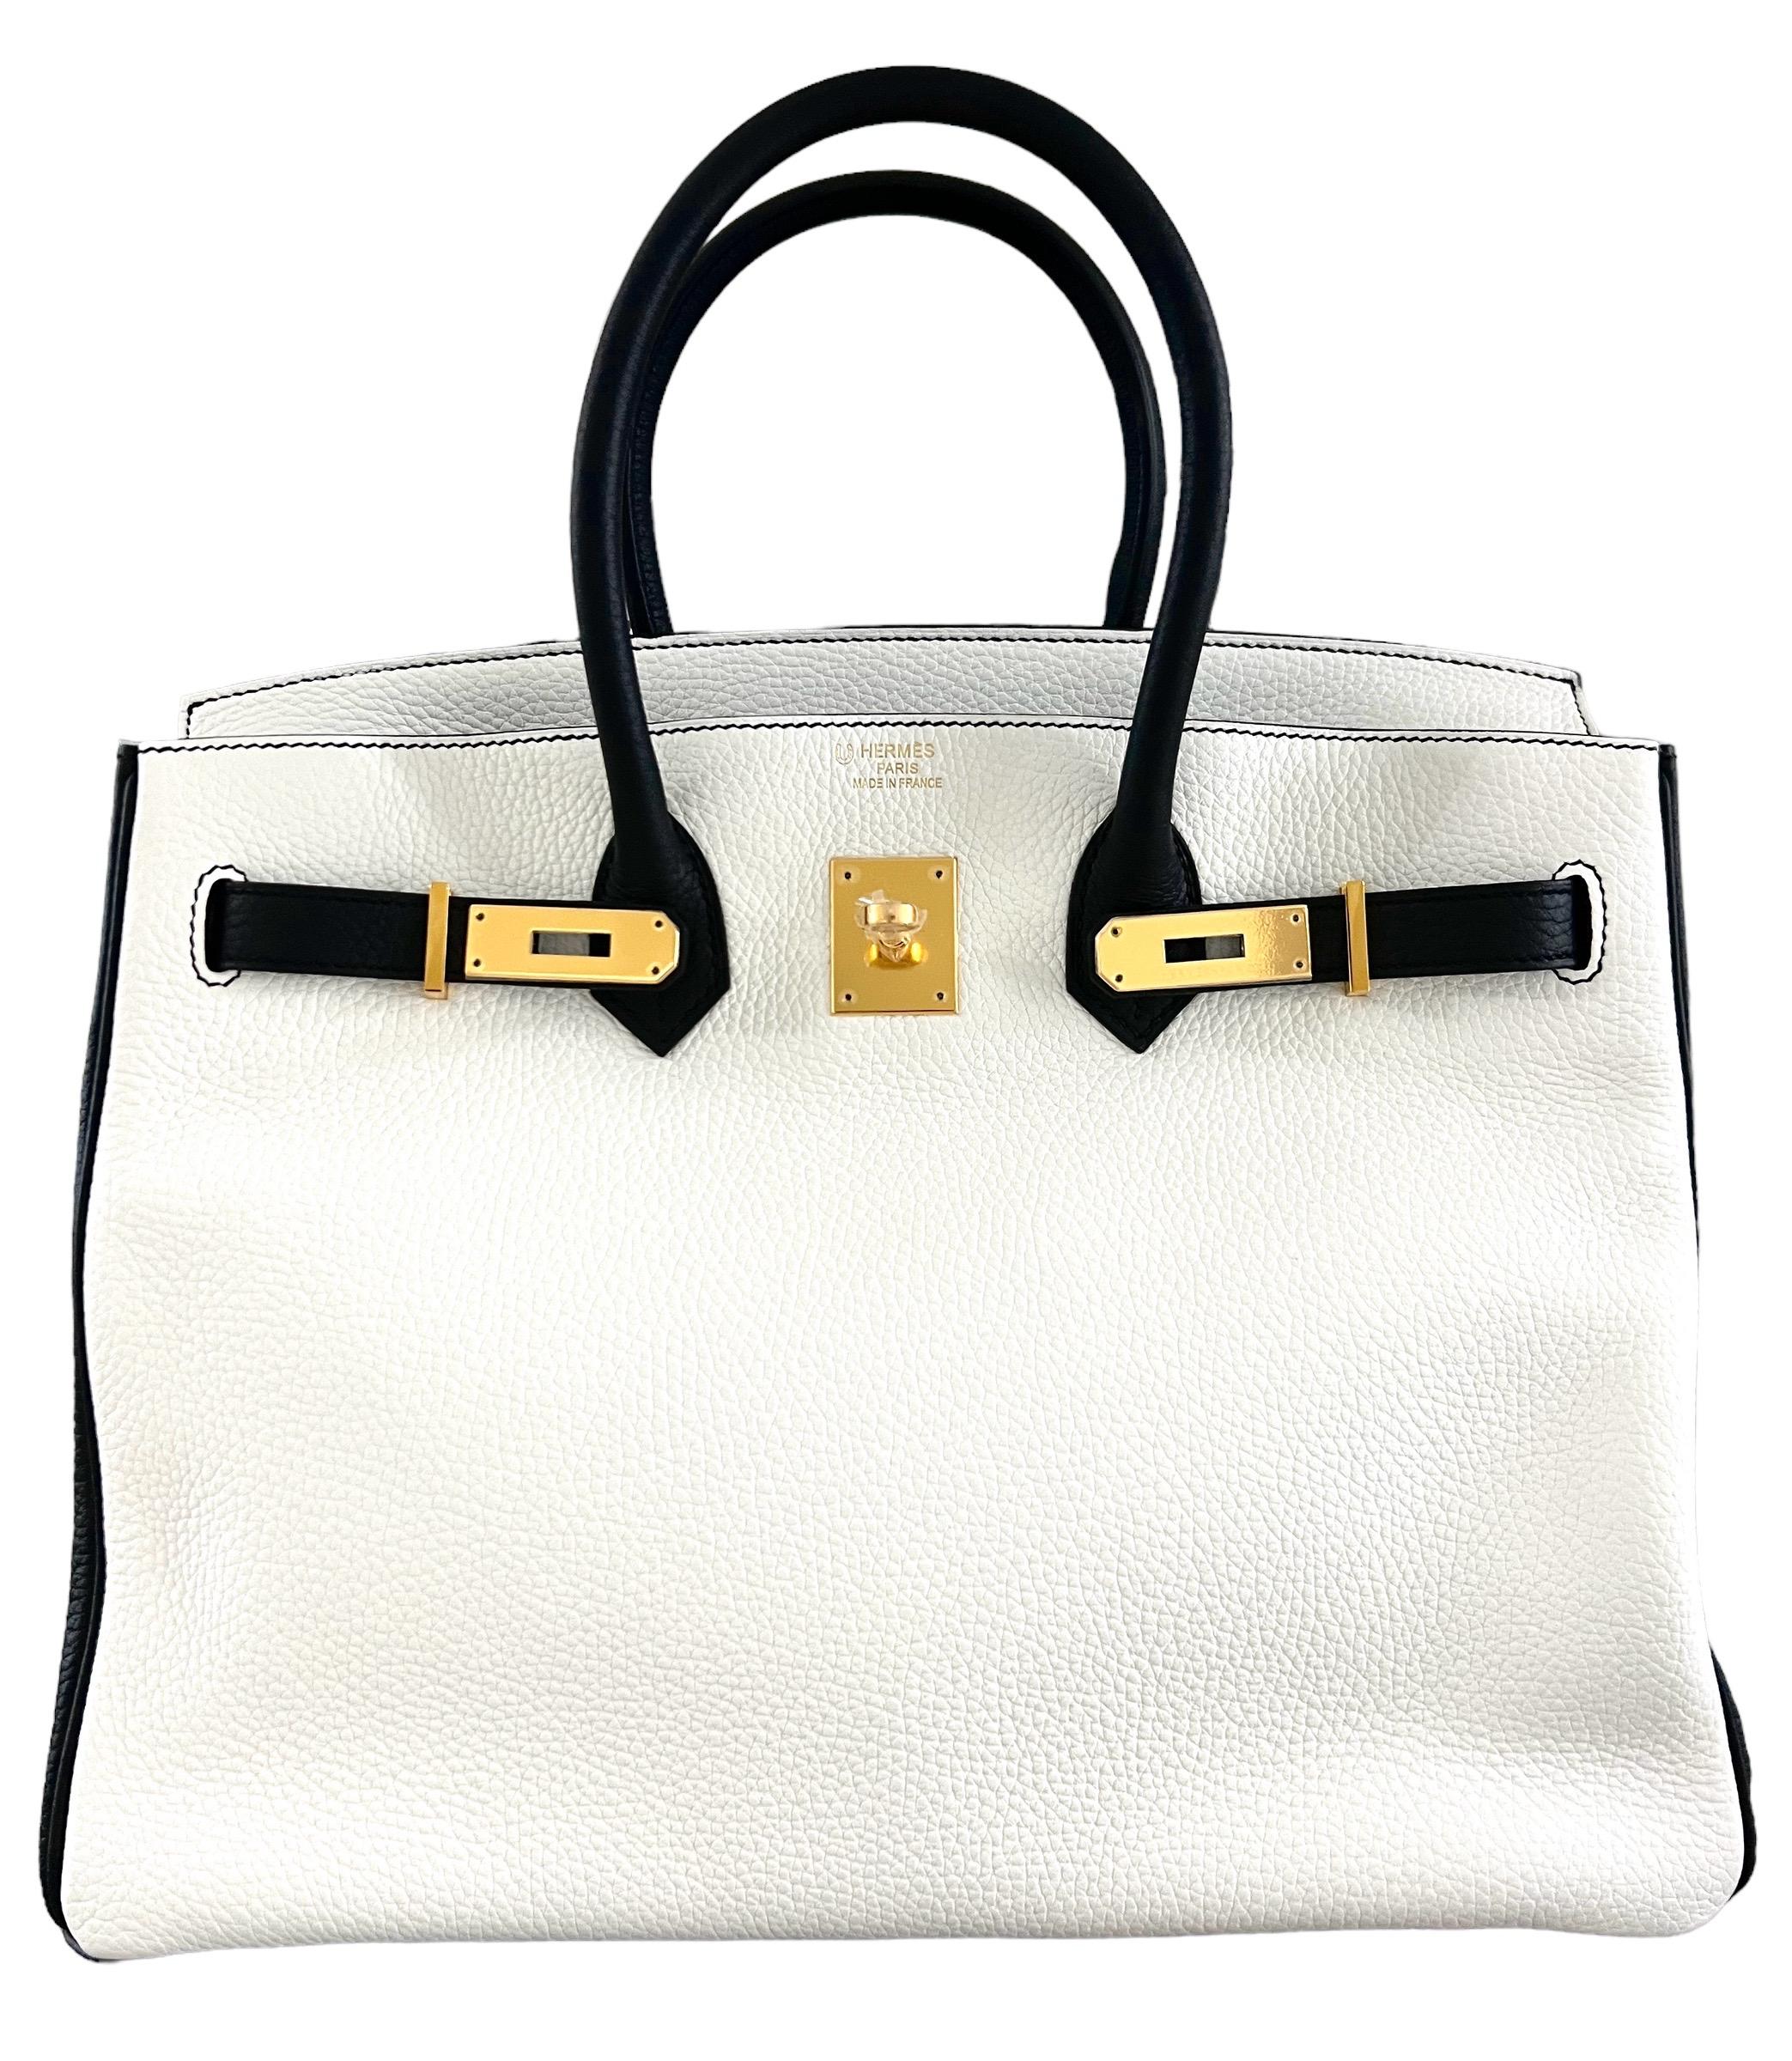 Hermes Birkin 35 Special Order PANDA ONE OF A KIND Togo Leather Gold Hardware In Excellent Condition For Sale In Miami, FL